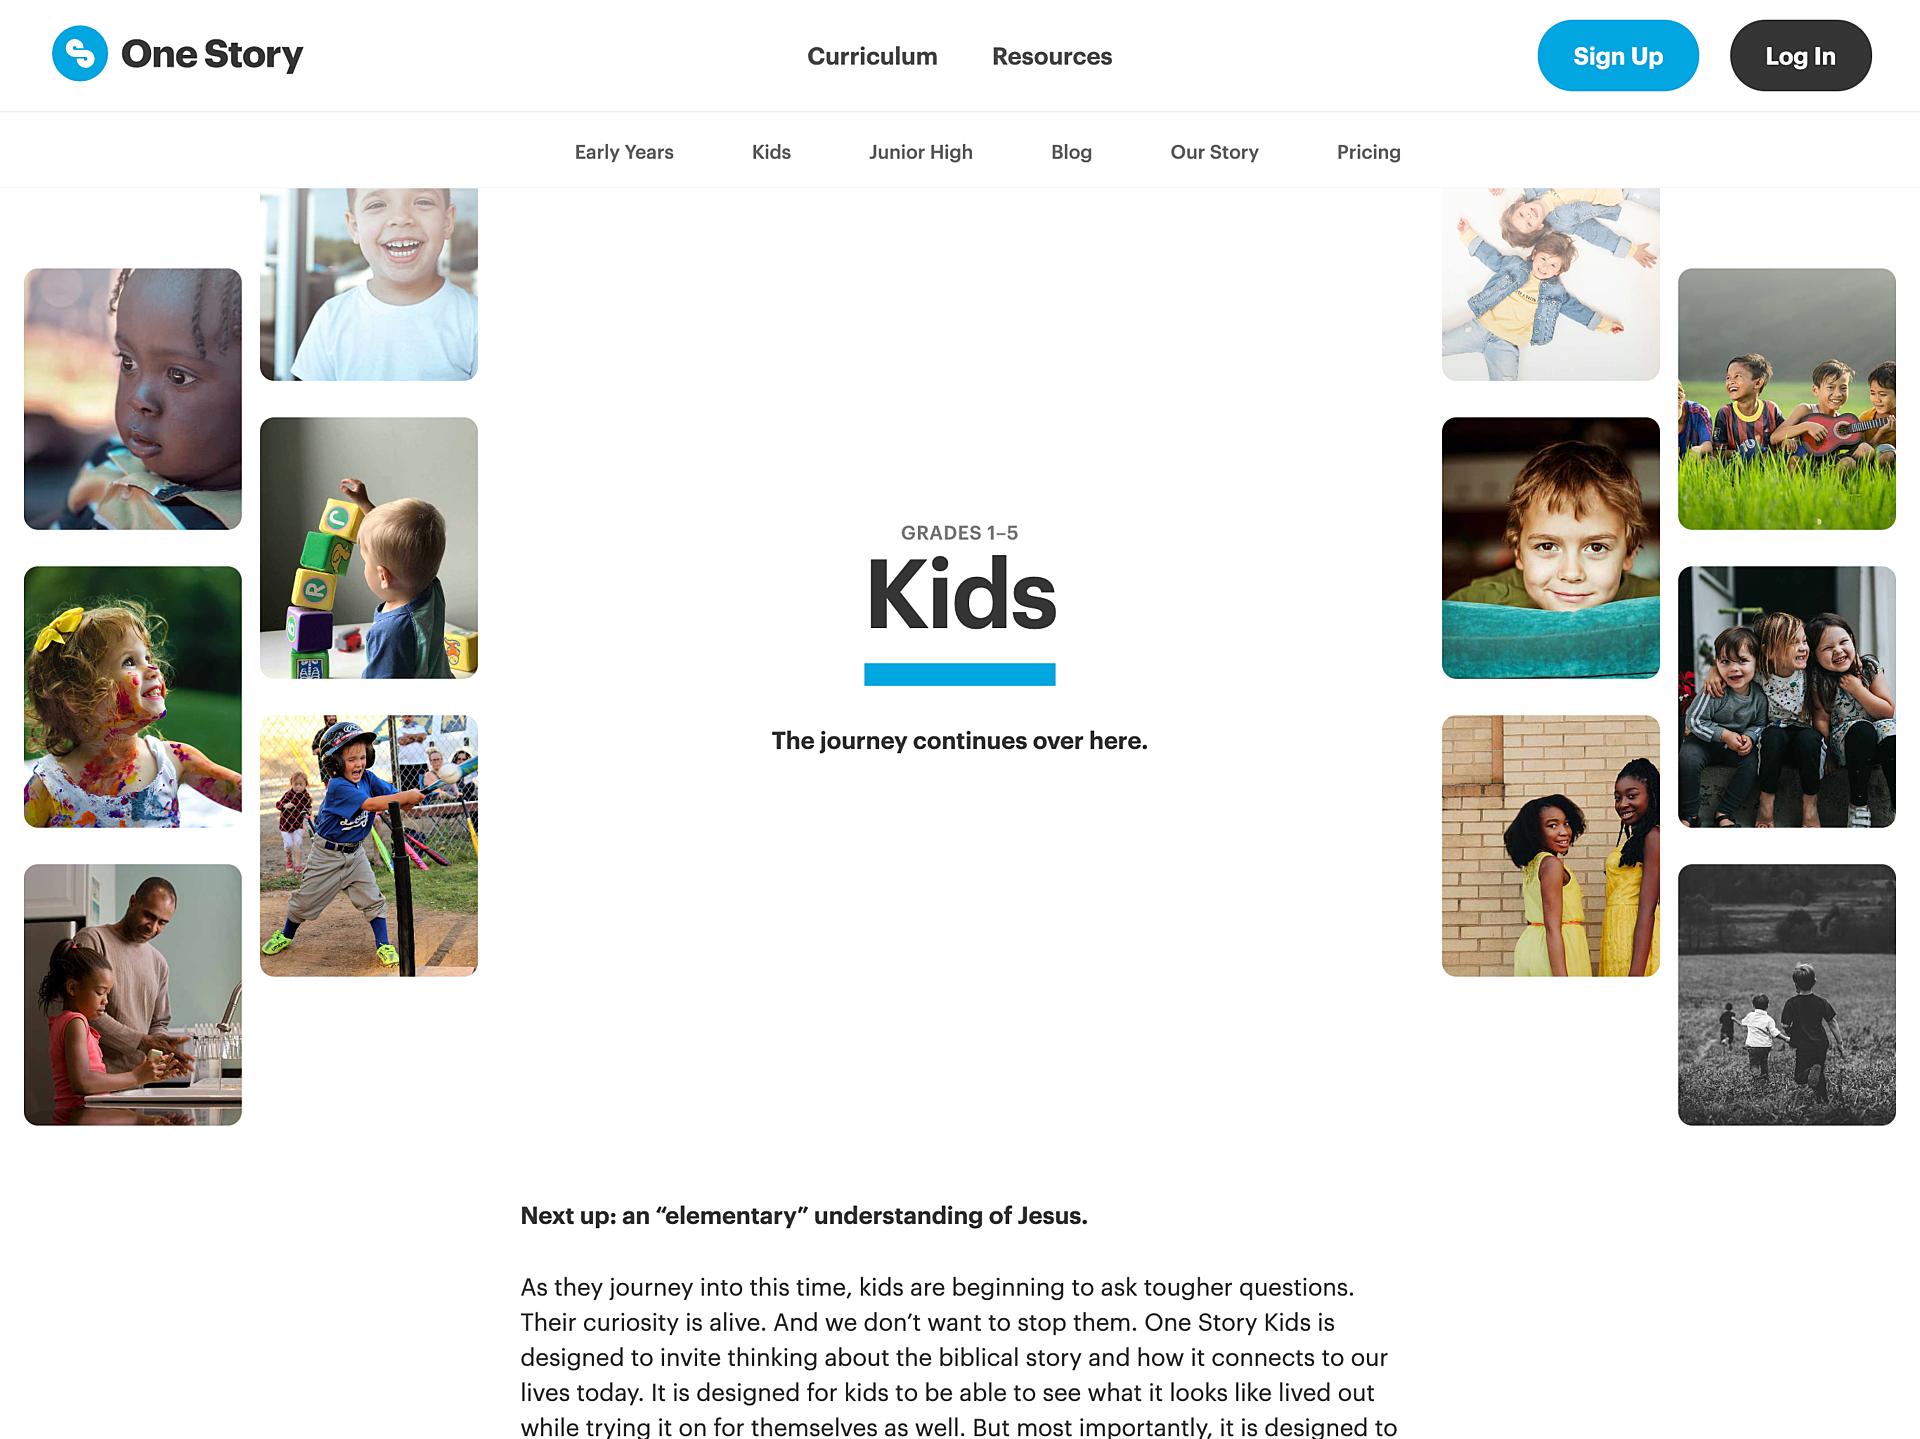 The page header of the Kids curriculum page on the One Story website